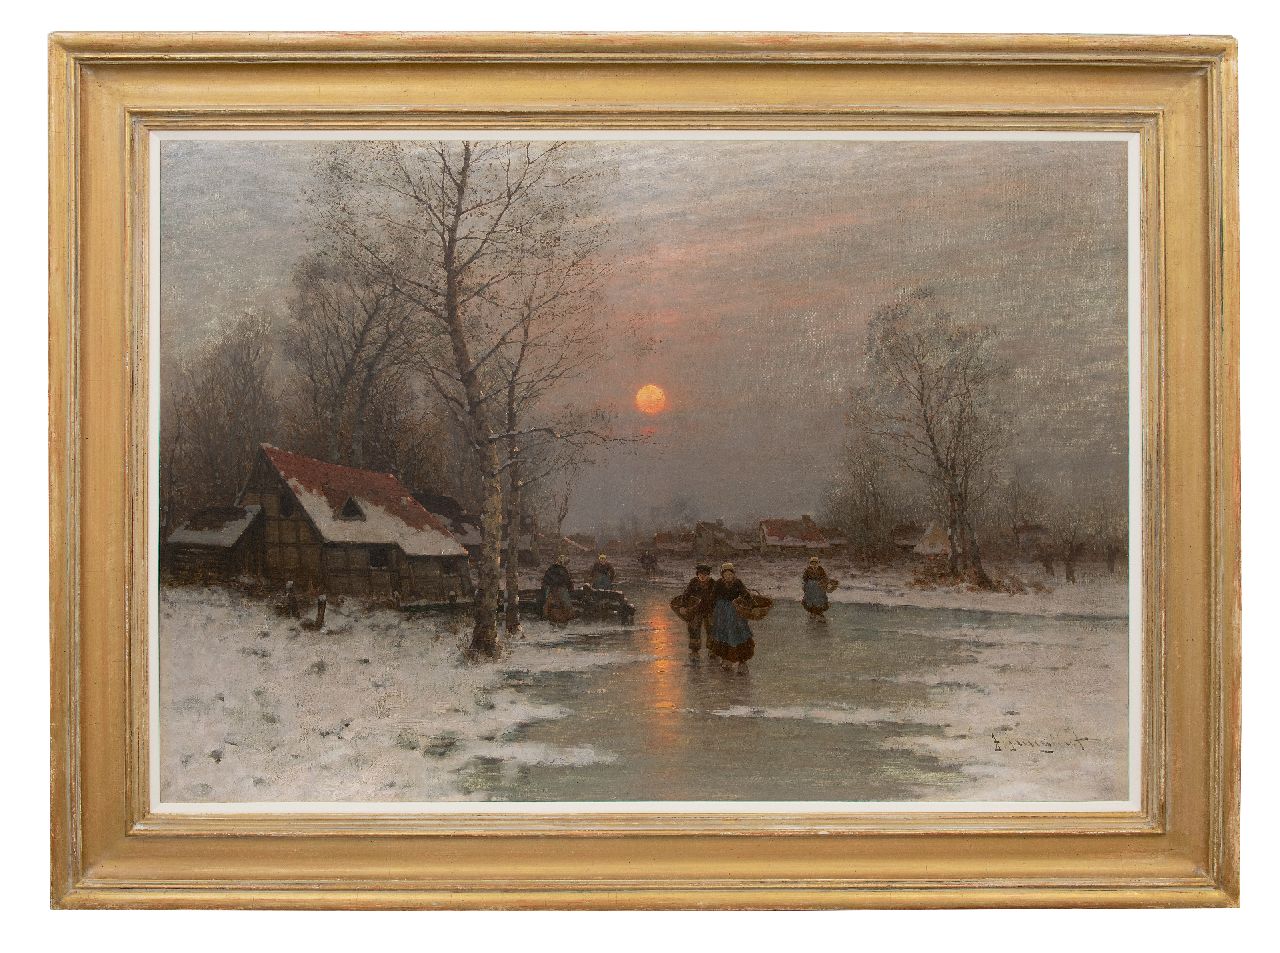 Jungblut J.  | Johann Jungblut | Paintings offered for sale | Land folk on a frozen river, oil on canvas 80.3 x 115.1 cm, signed l.r.